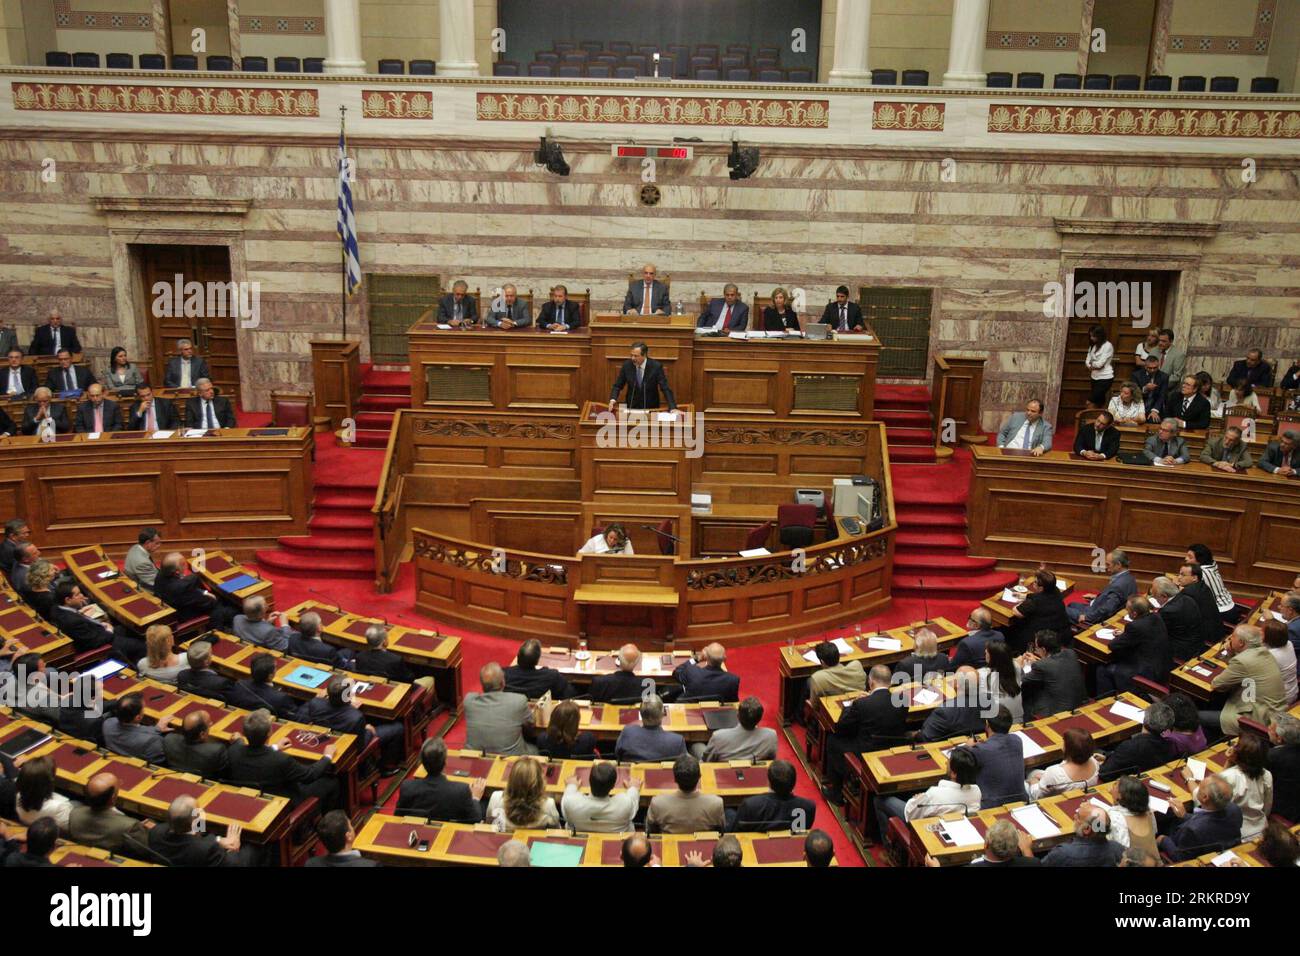 Bildnummer: 58203138  Datum: 06.07.2012  Copyright: imago/Xinhua (120706) -- ATHENS, July 6, 2012 (Xinhua) -- Greek Prime Minister Antonis Samaras (C) delivers his speech at the Greek parliament in Athens, Greece, on July 6, 2012. Greece s new three-party coalition government is ready to carry out long-delayed structural reforms, Samaras said Friday, as he acknowledged that the deficit reduction program has gone off target. (Xinhua/Marios Lolos) GREECE-GOVERNMENT-NEW PM PUBLICATIONxNOTxINxCHN People Politik premiumd xbs x0x 2012 quer      58203138 Date 06 07 2012 Copyright Imago XINHUA  Athens Stock Photo